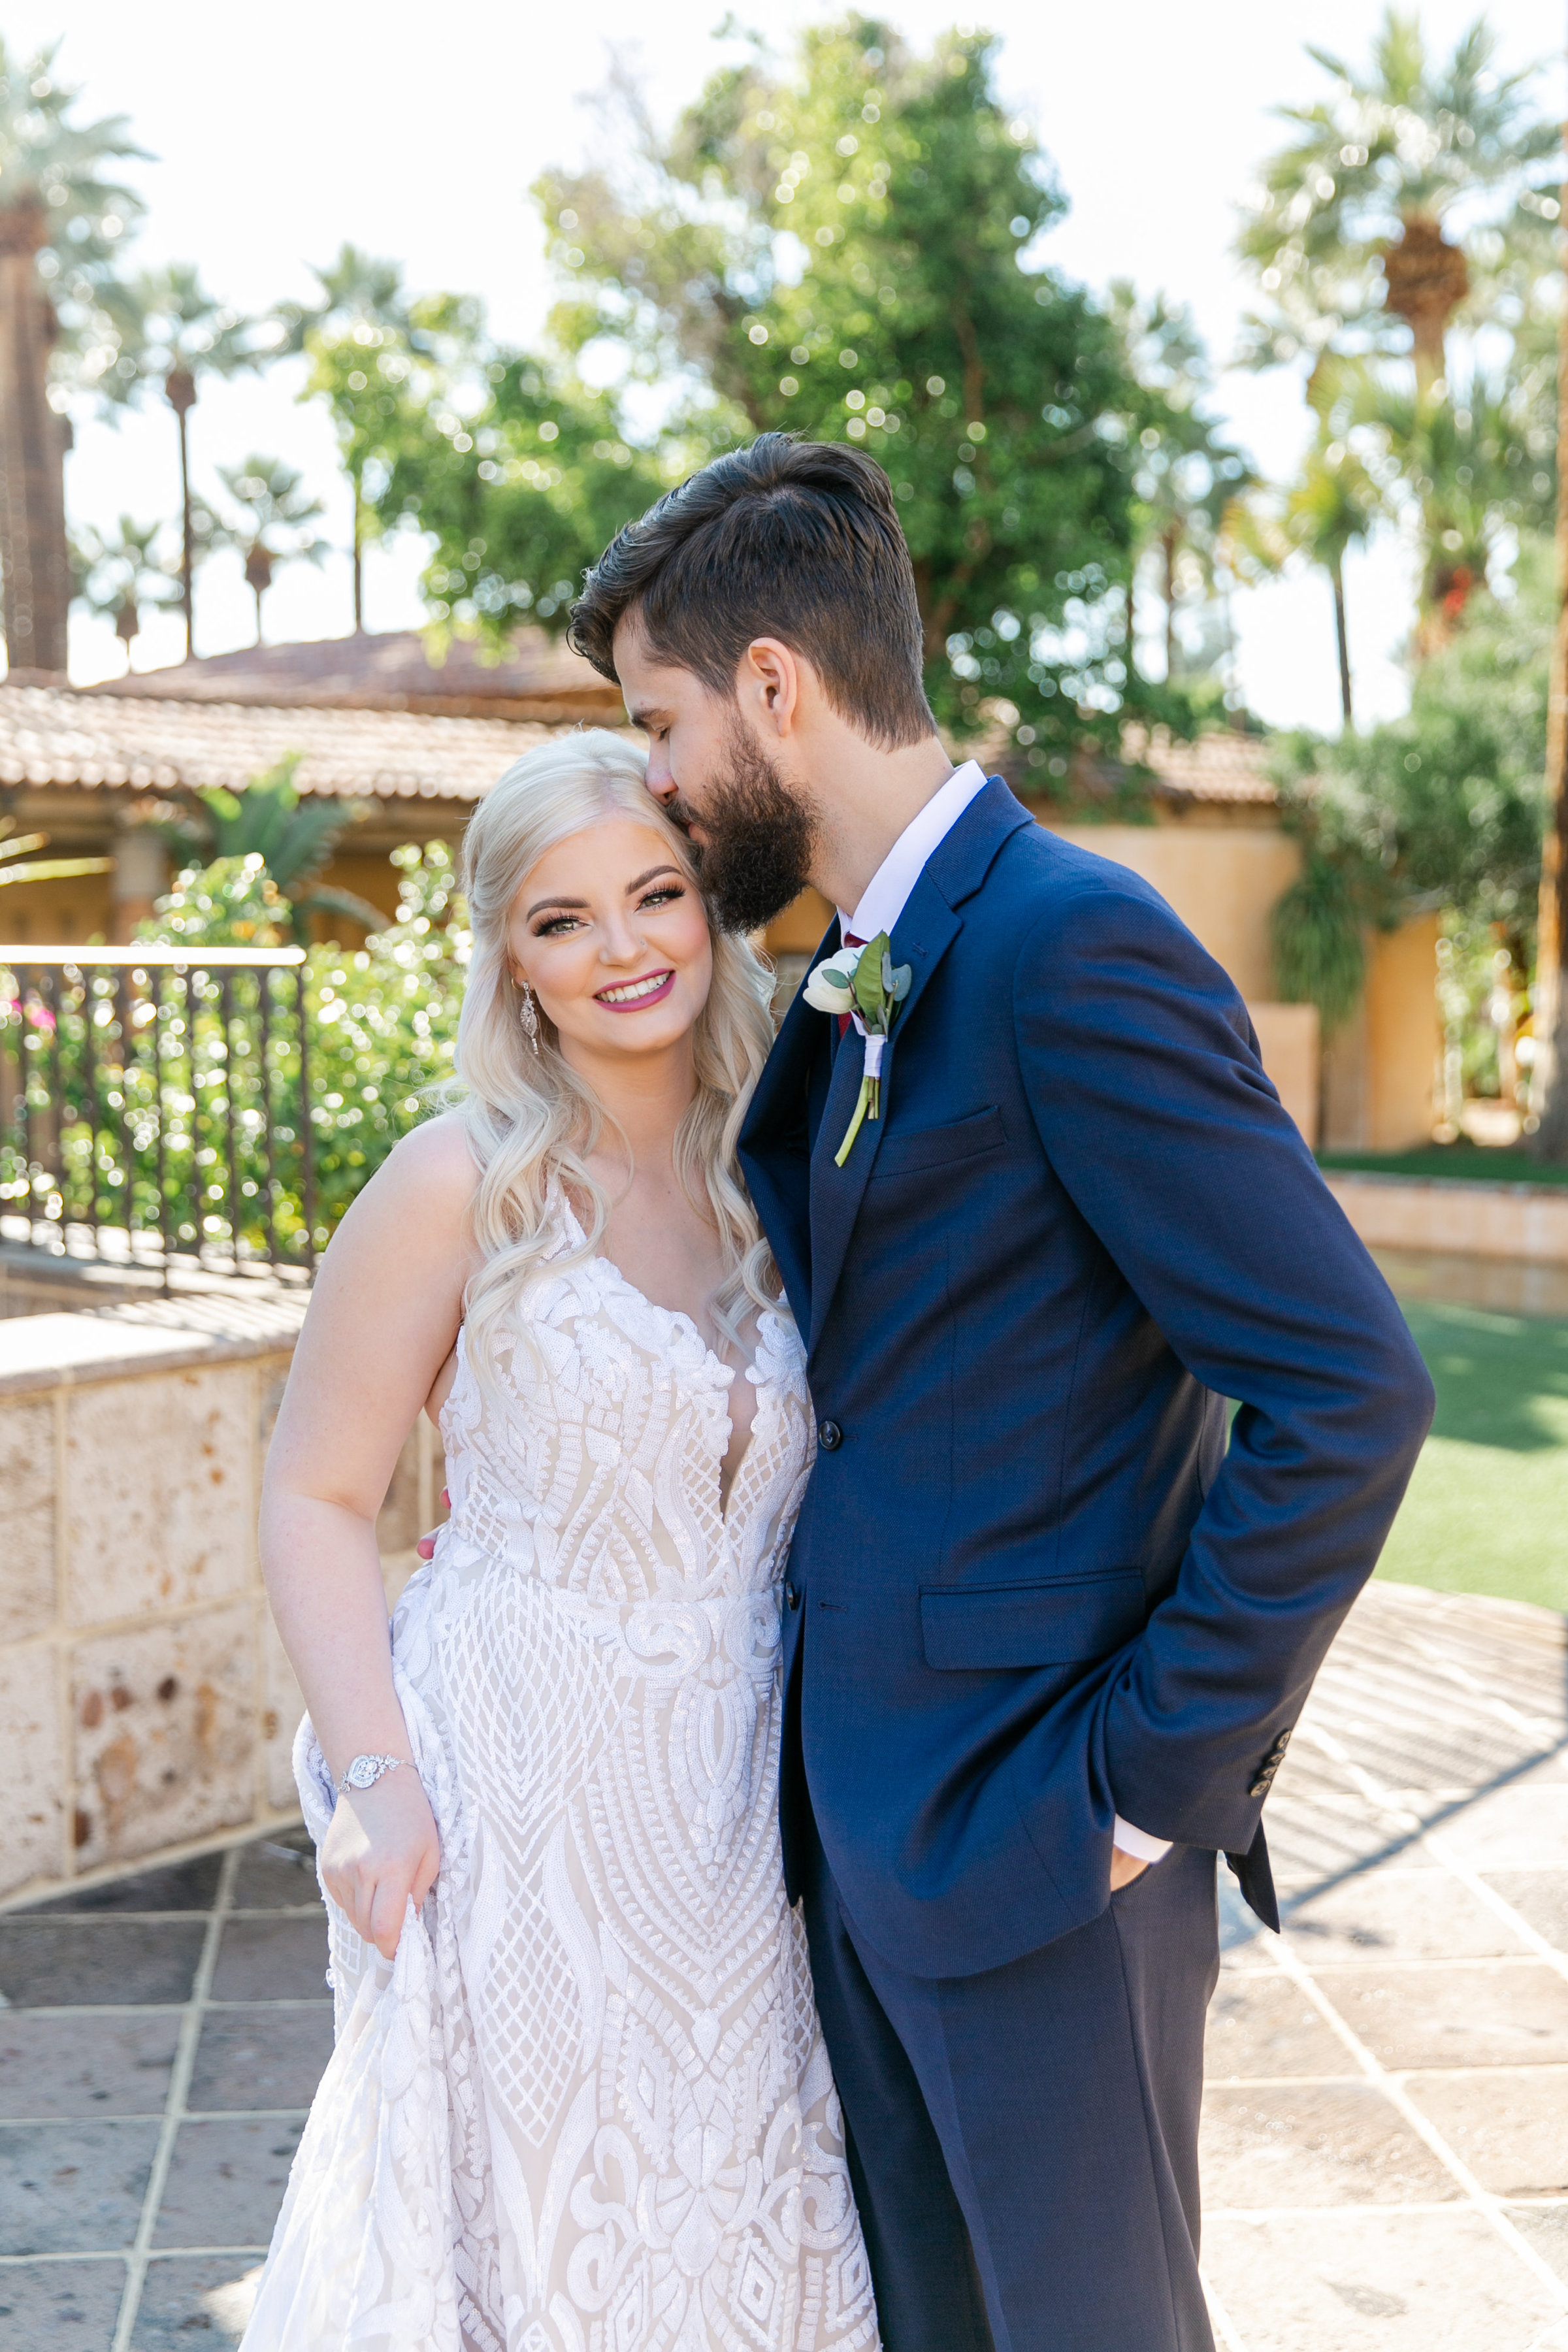 Karlie Colleen Photography - The Royal Palms Wedding - Some Like It Classic - Alex & Sam-124